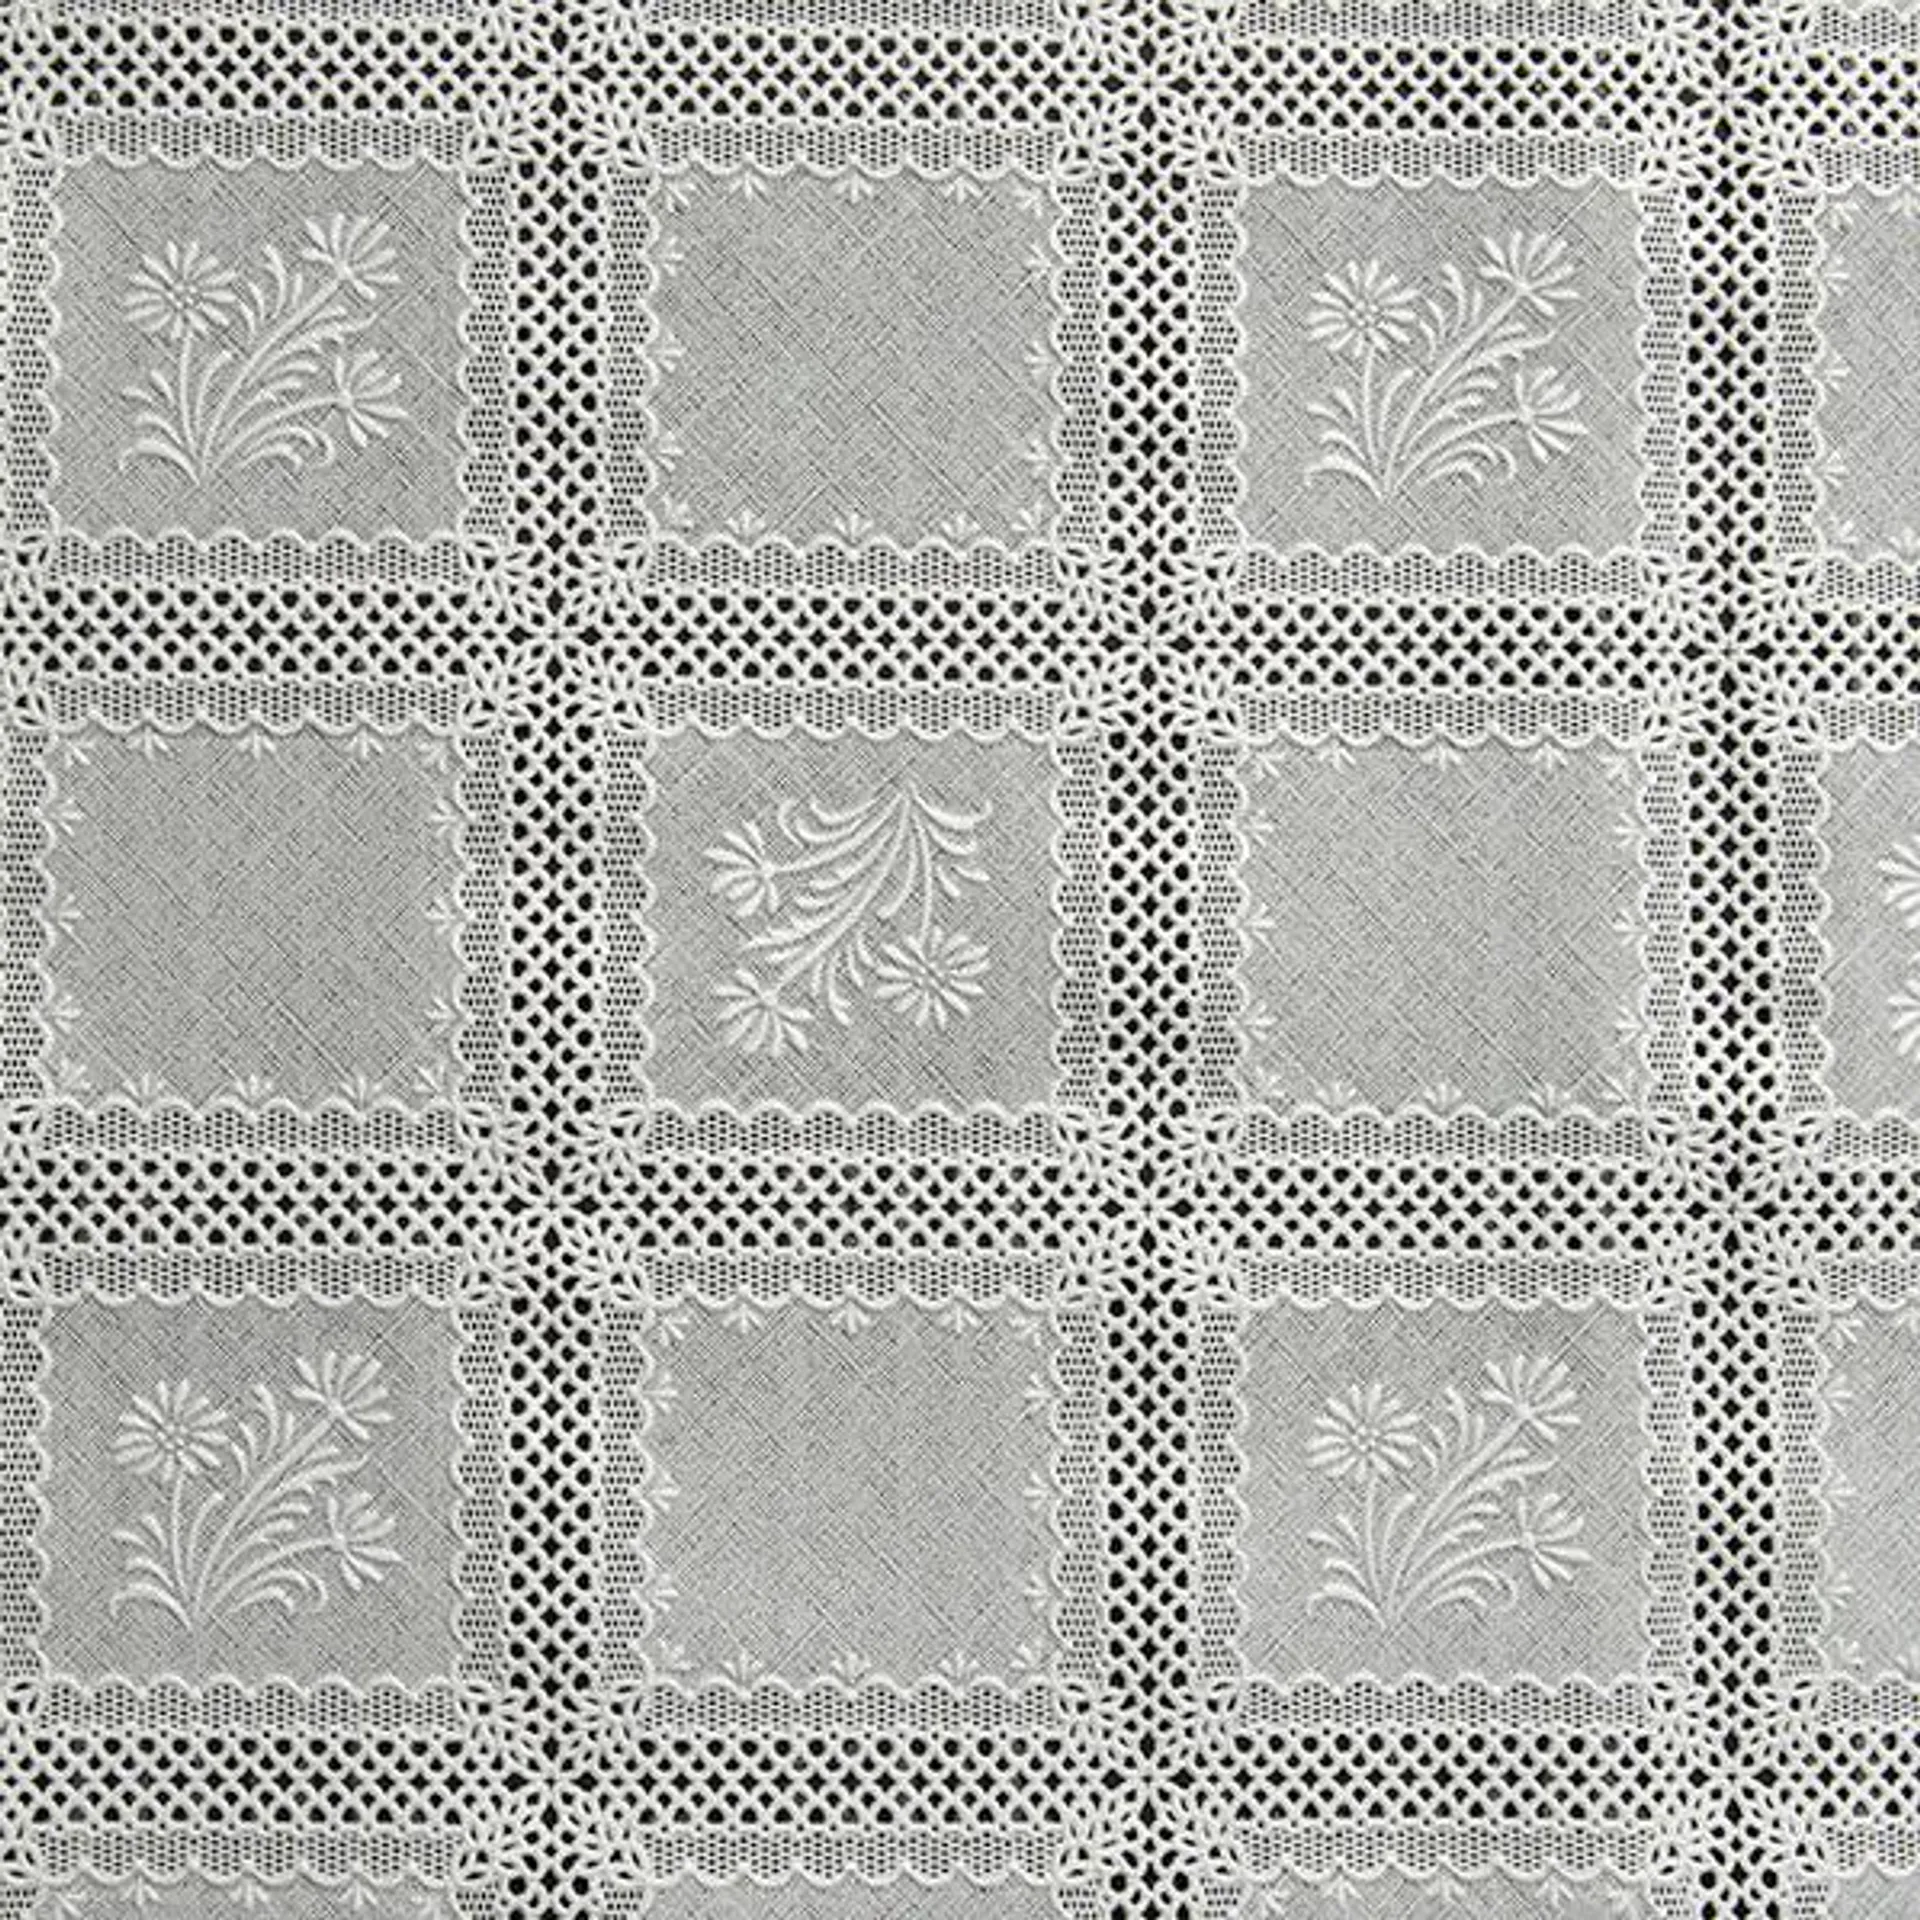 PVC Lace Runner, White Square- Width 50cm